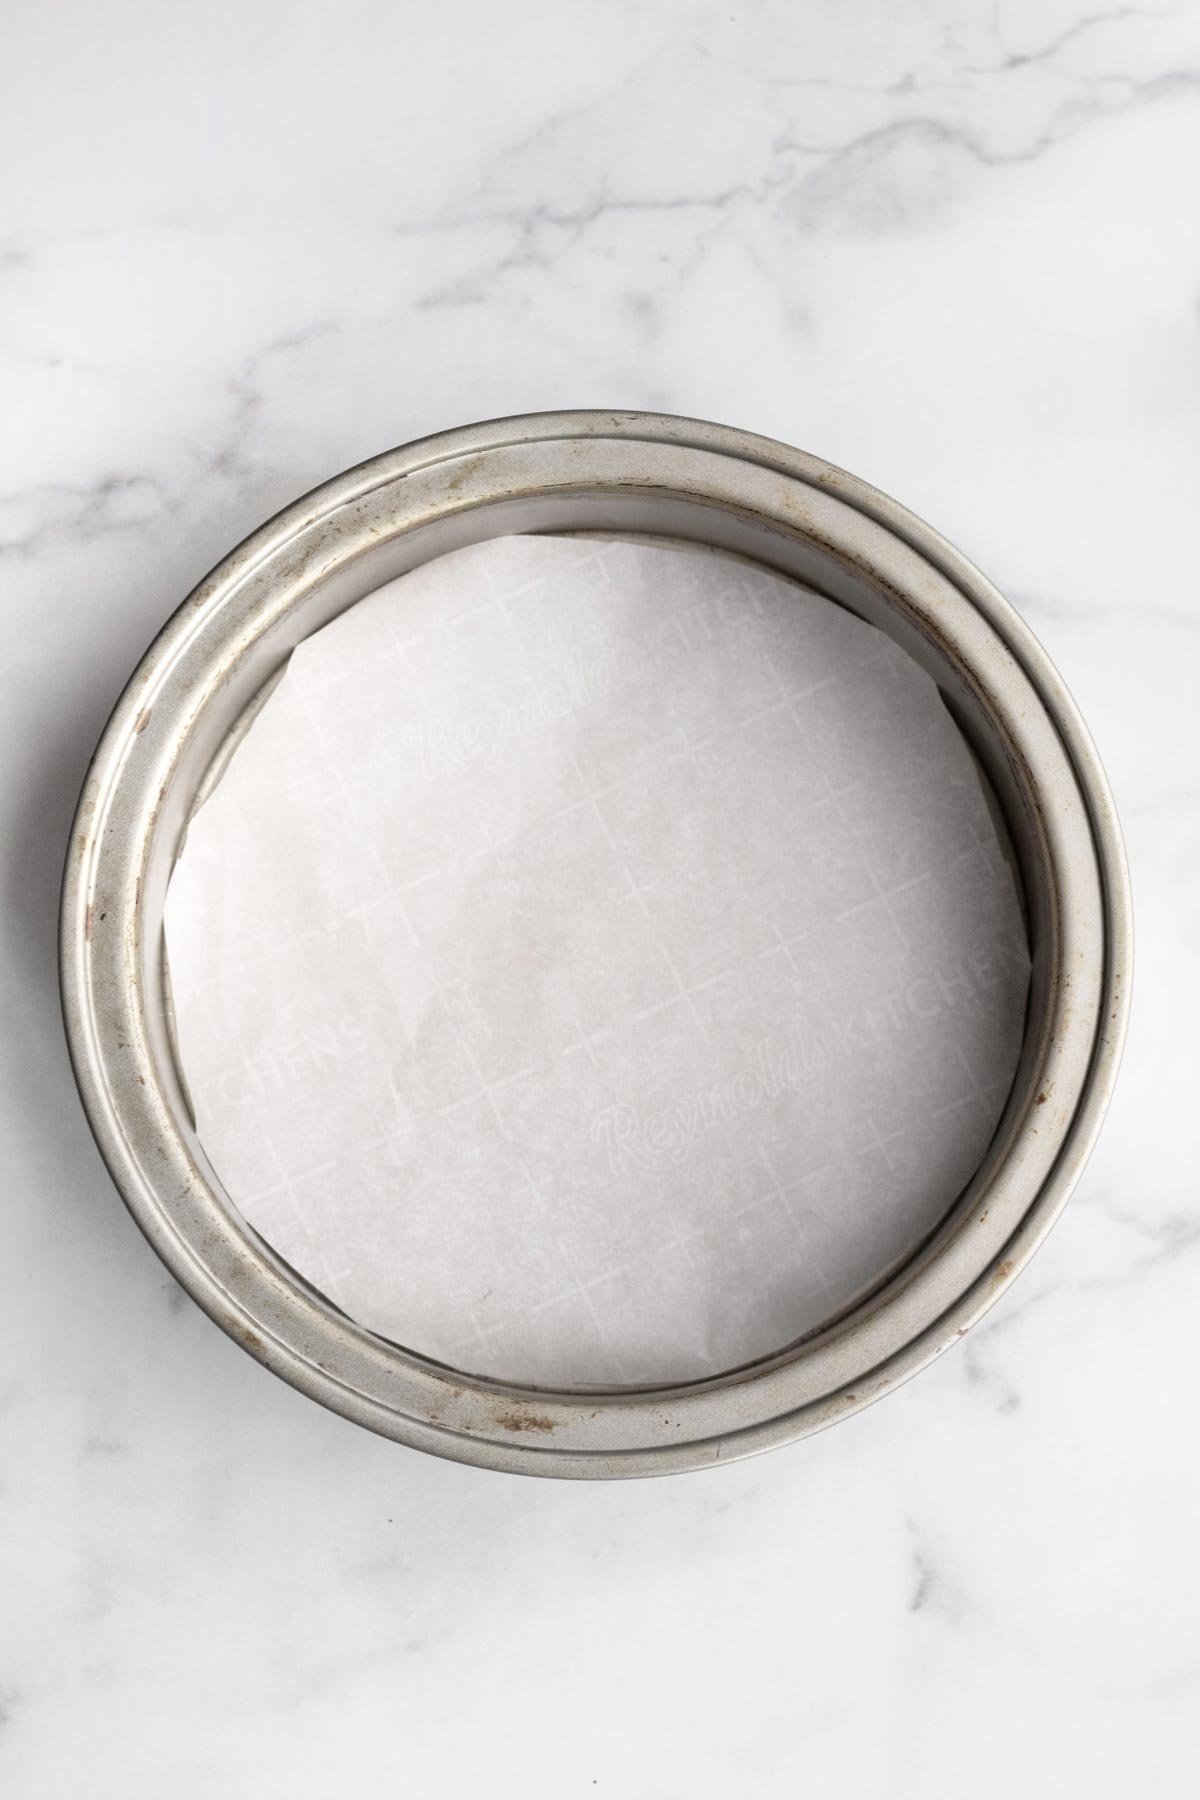 A cake pan lined with a circle of parchment paper.